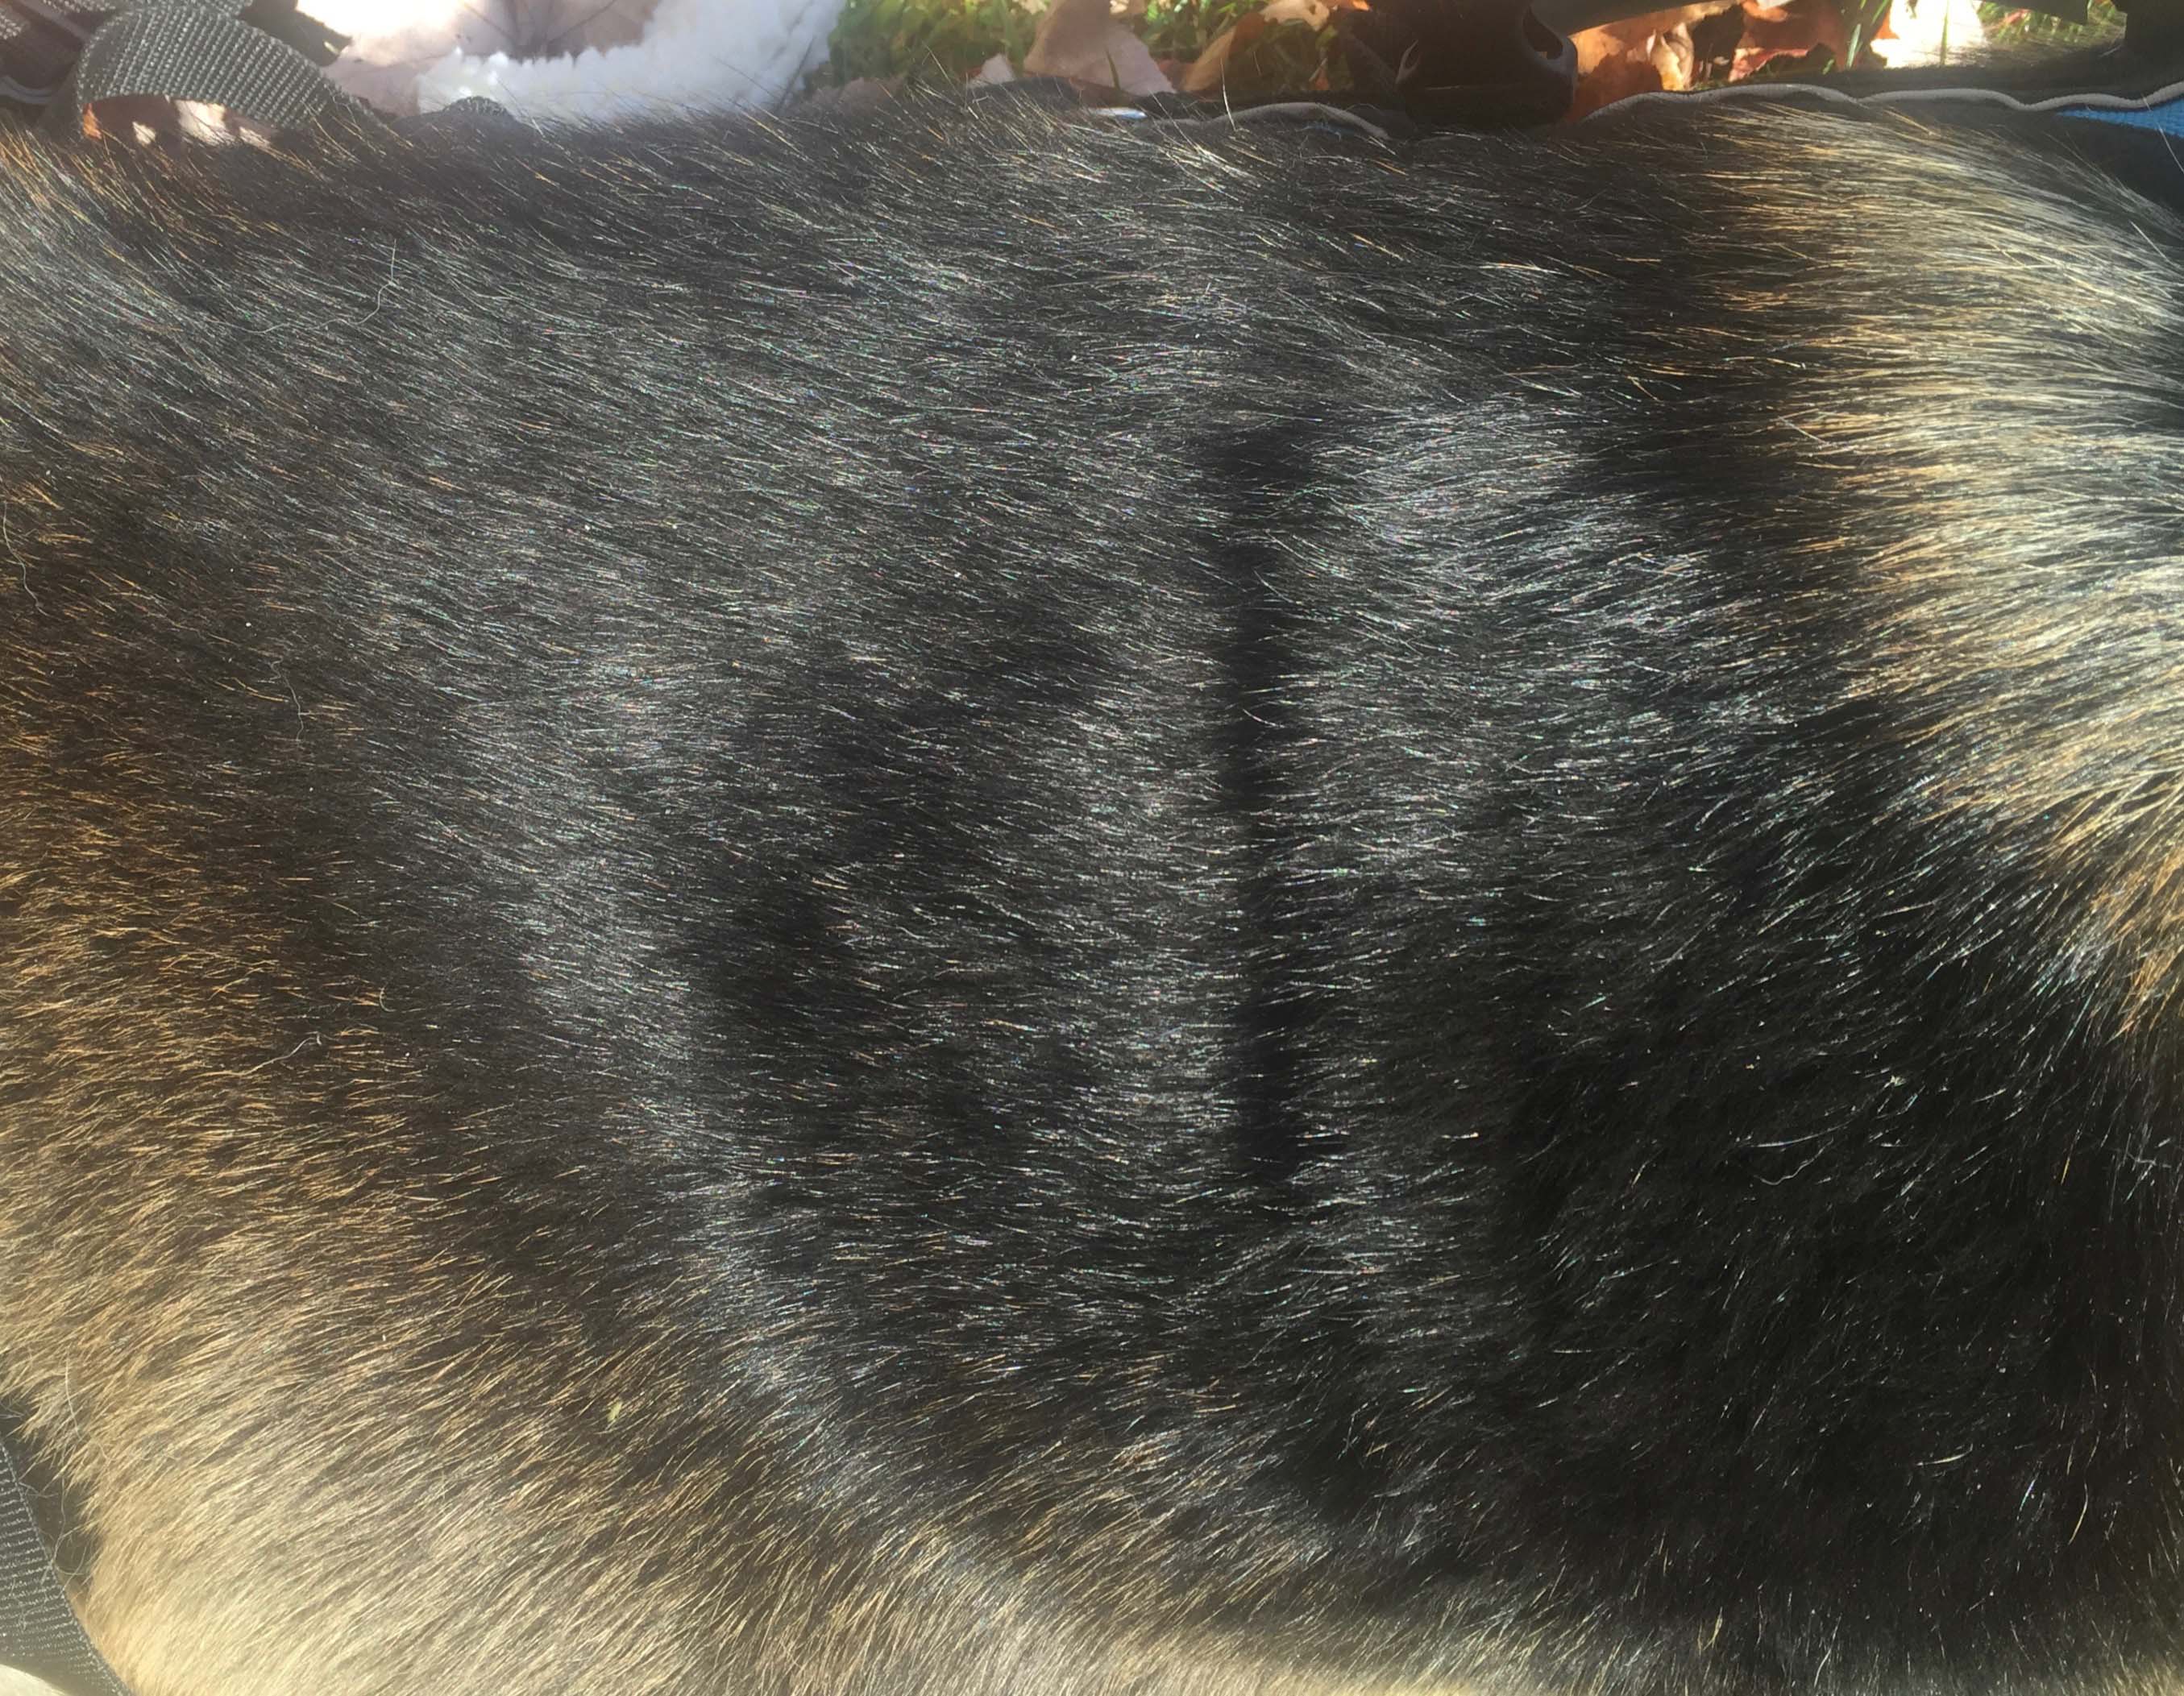 Dog Dandruff This is How To Fix it in 10 minutes